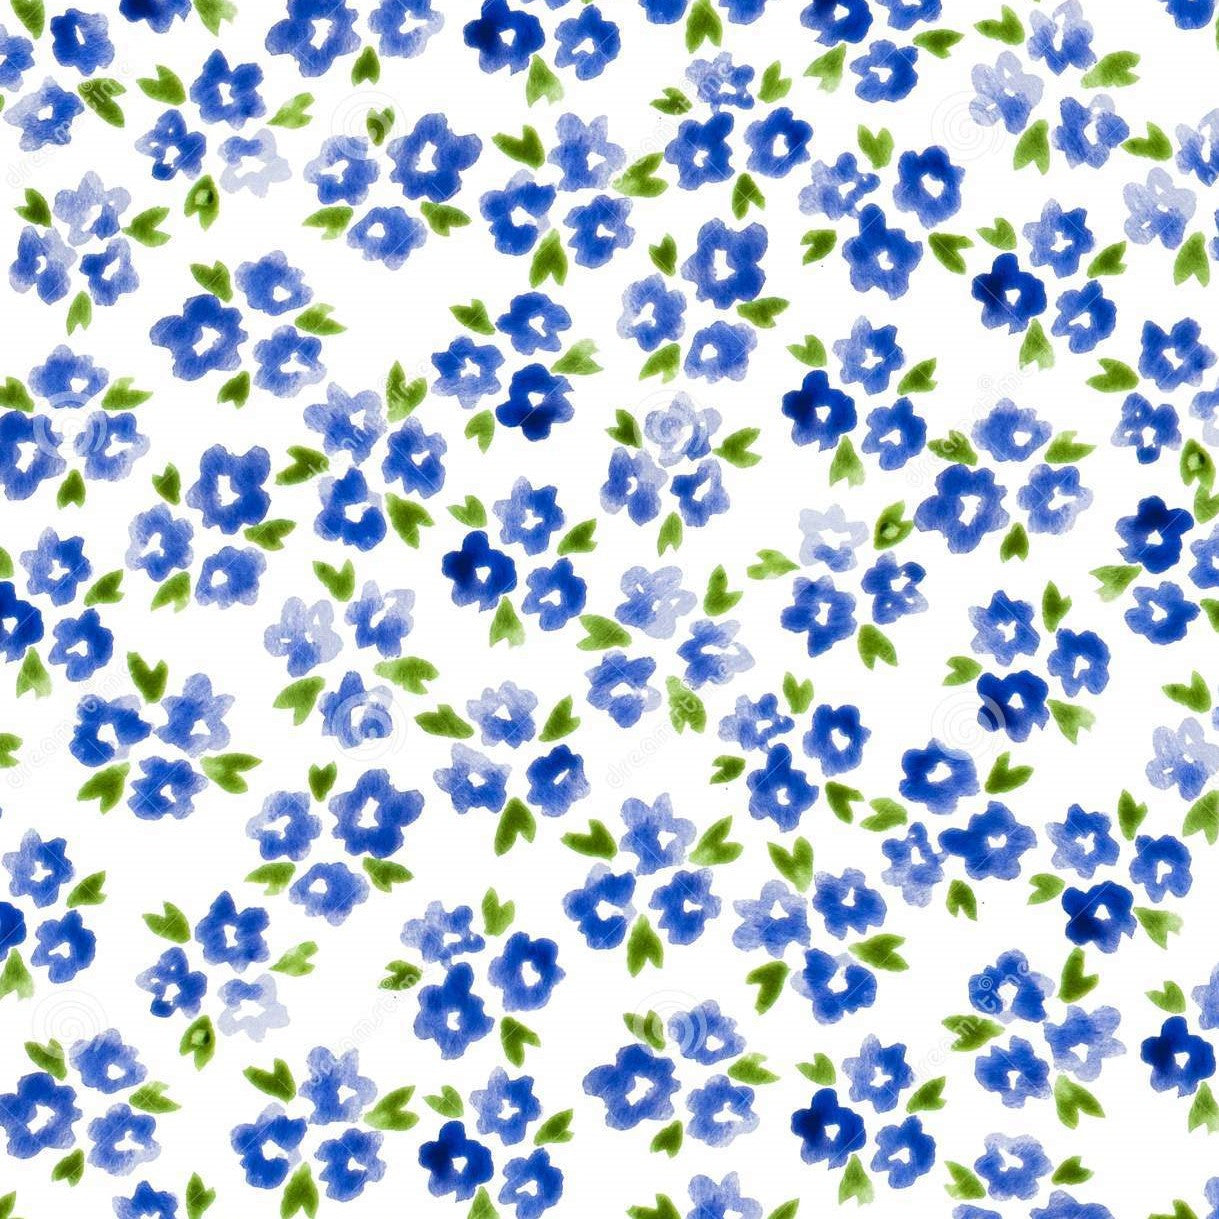 Calico Floral Pattern